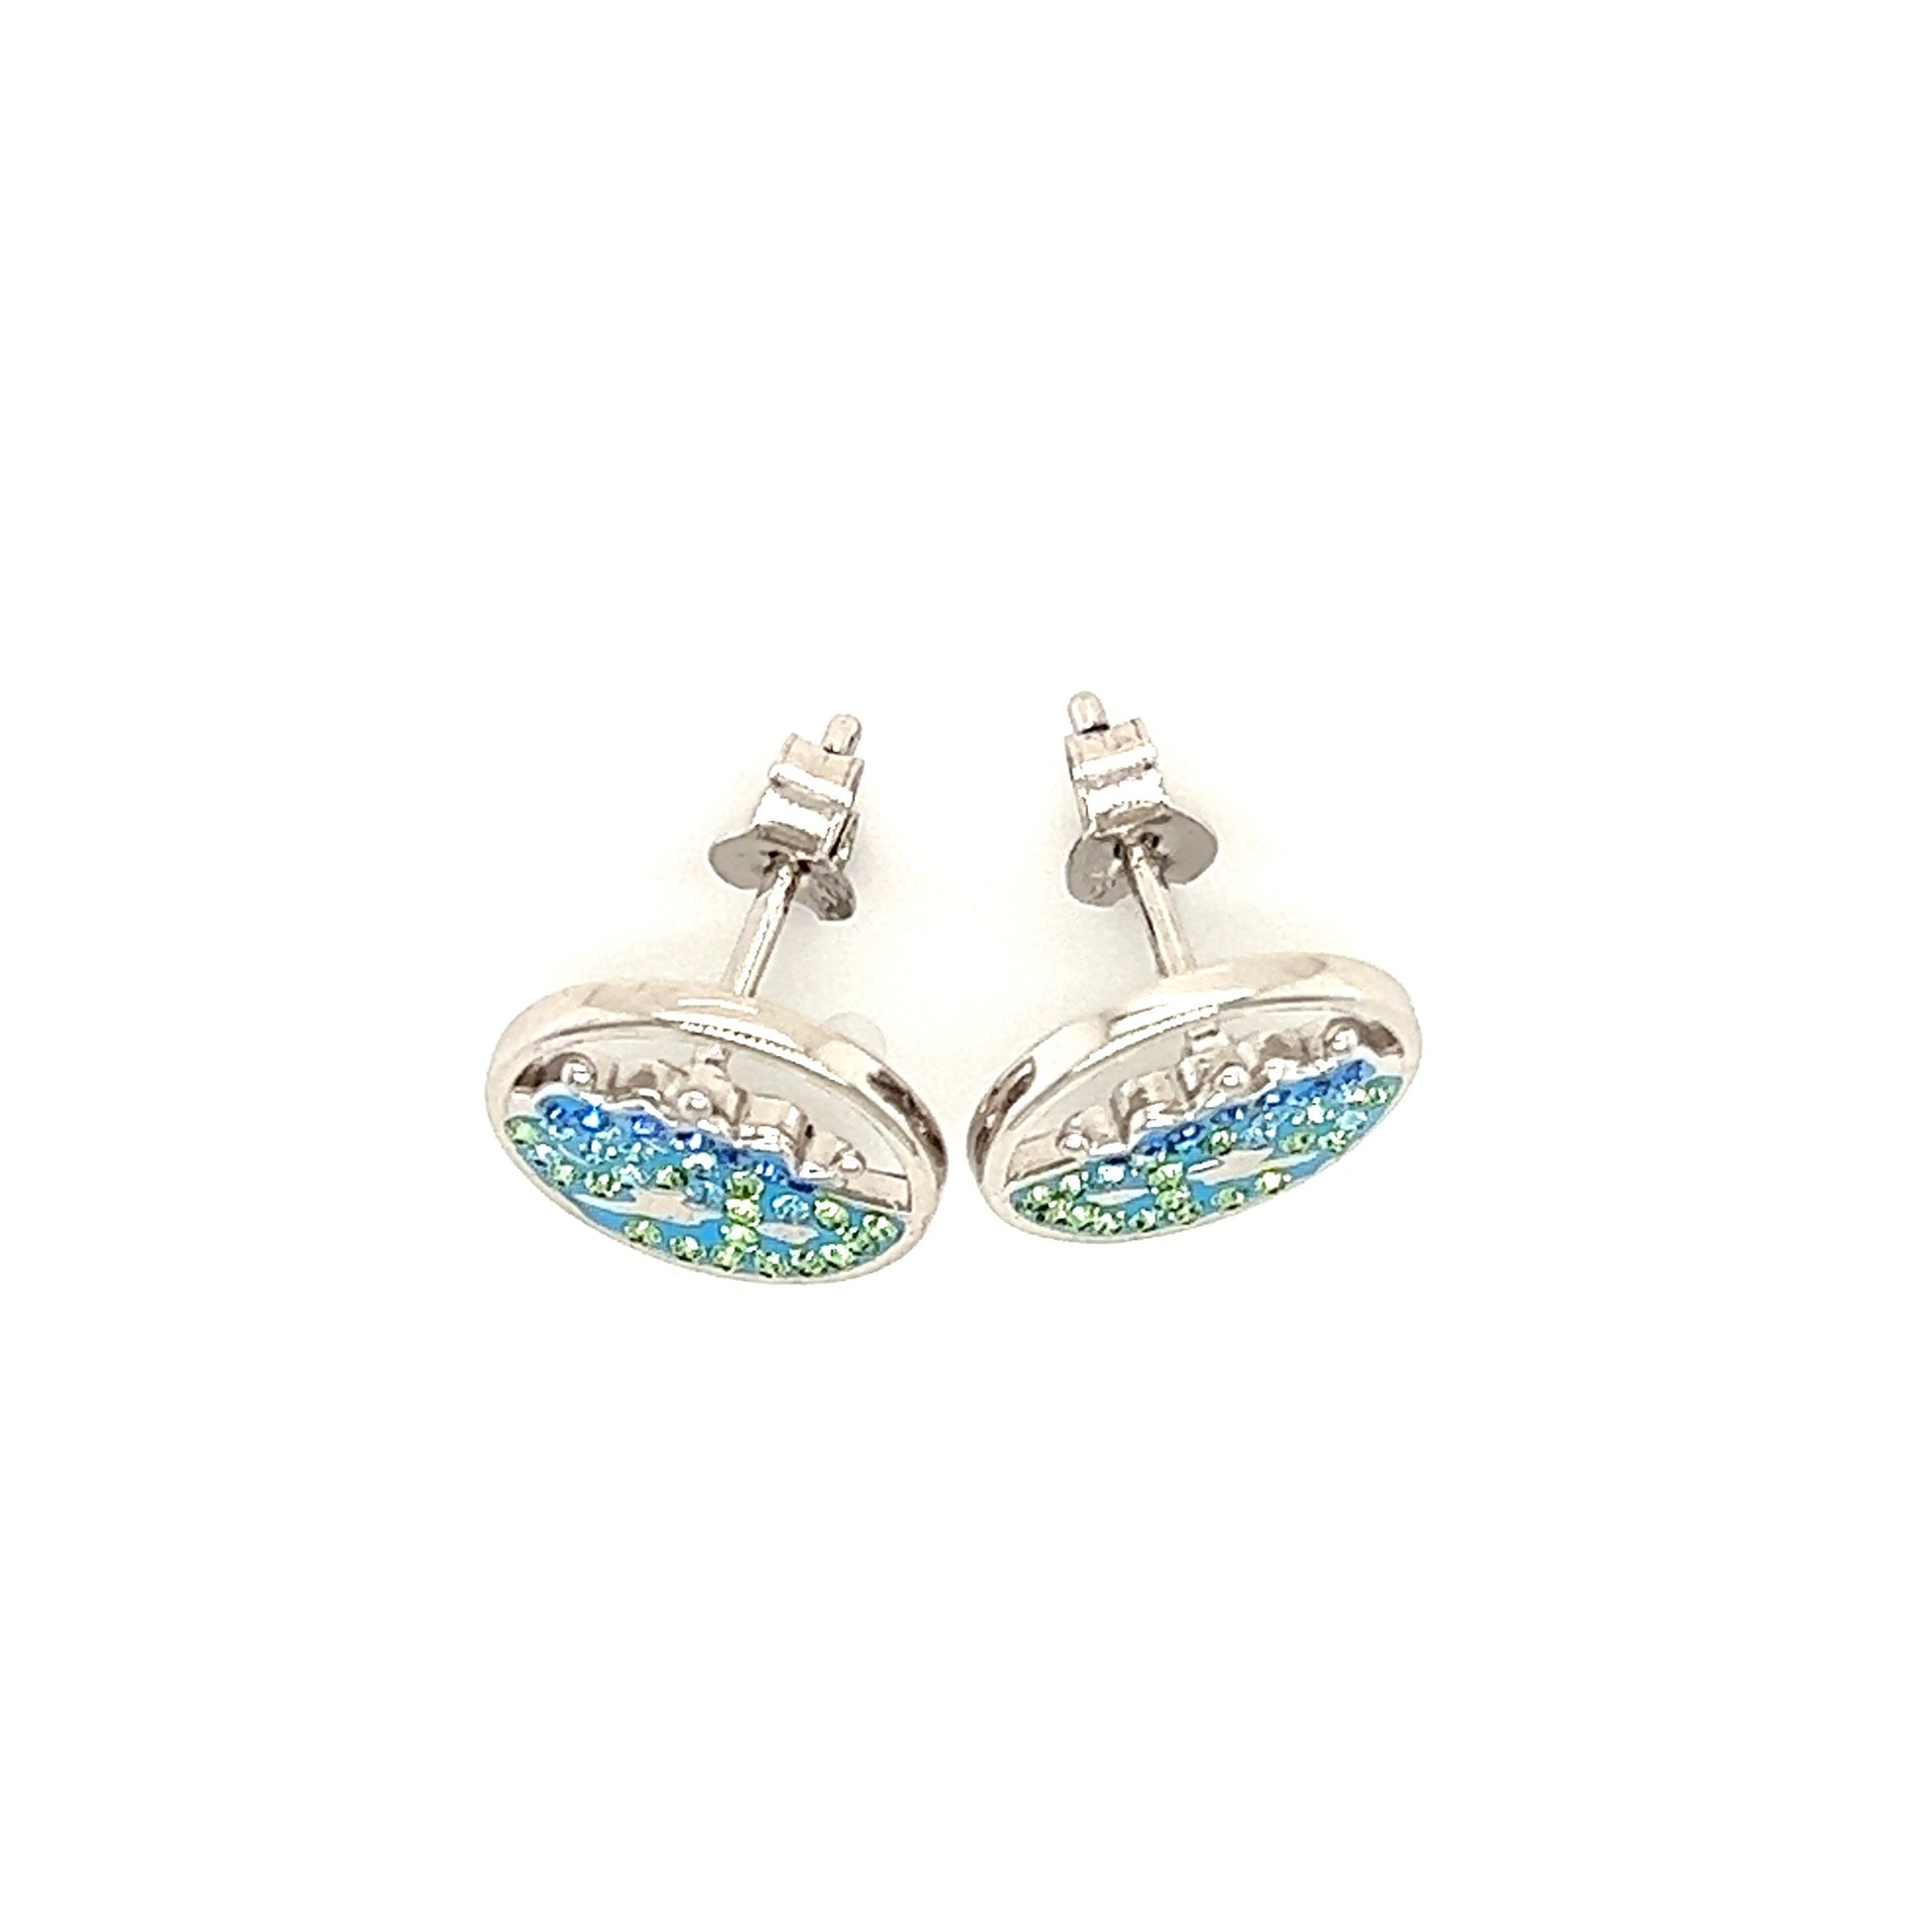 Wave Stud Earrings with Blue, Aqua and Green Crystals in Sterling Silver. Top View